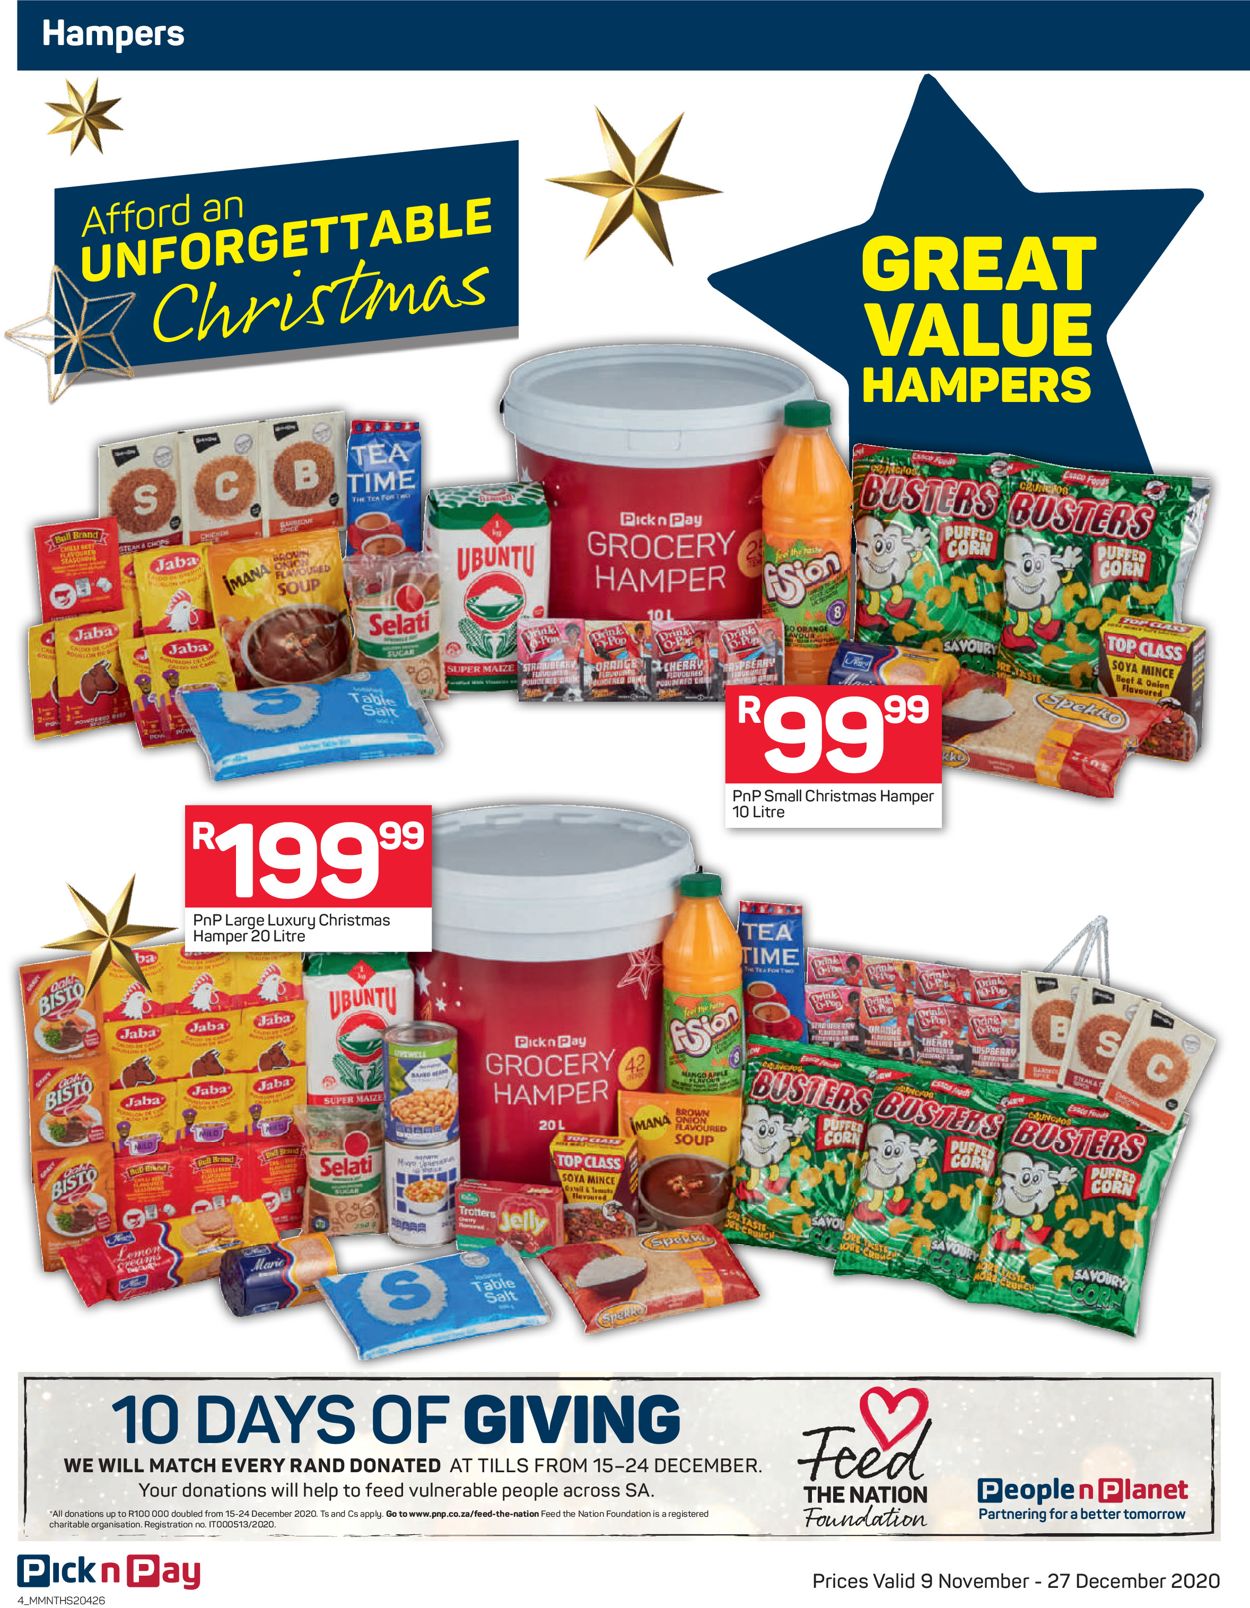 Pick n Pay Holidays 2020 Catalogue - 2020/11/09-2020/11/27 (Page 4)